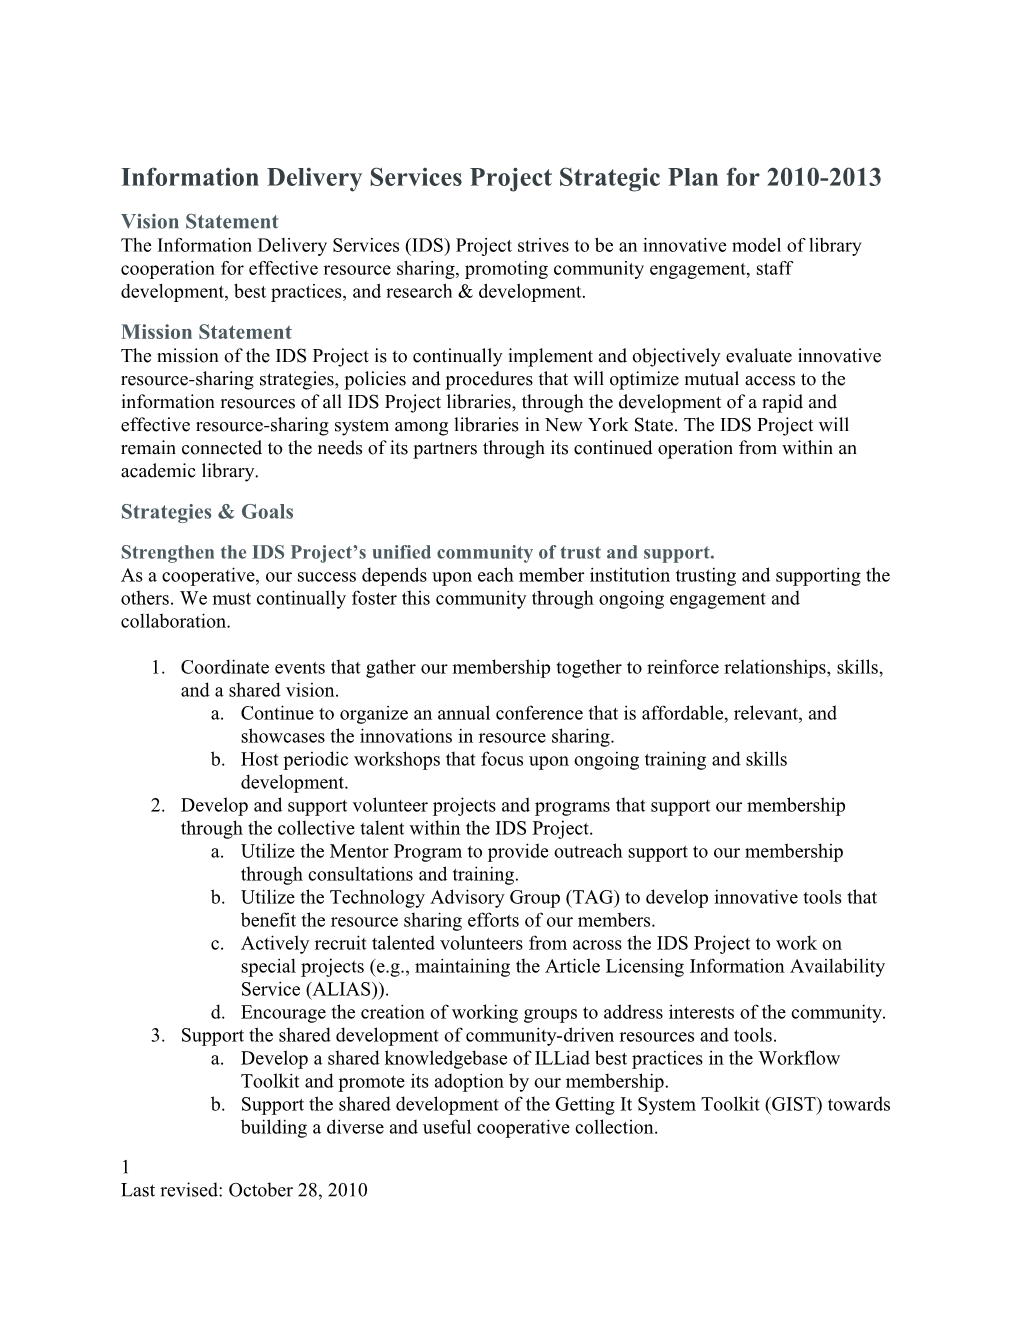 Information Delivery Services Project Strategic Plan for 2010-2013